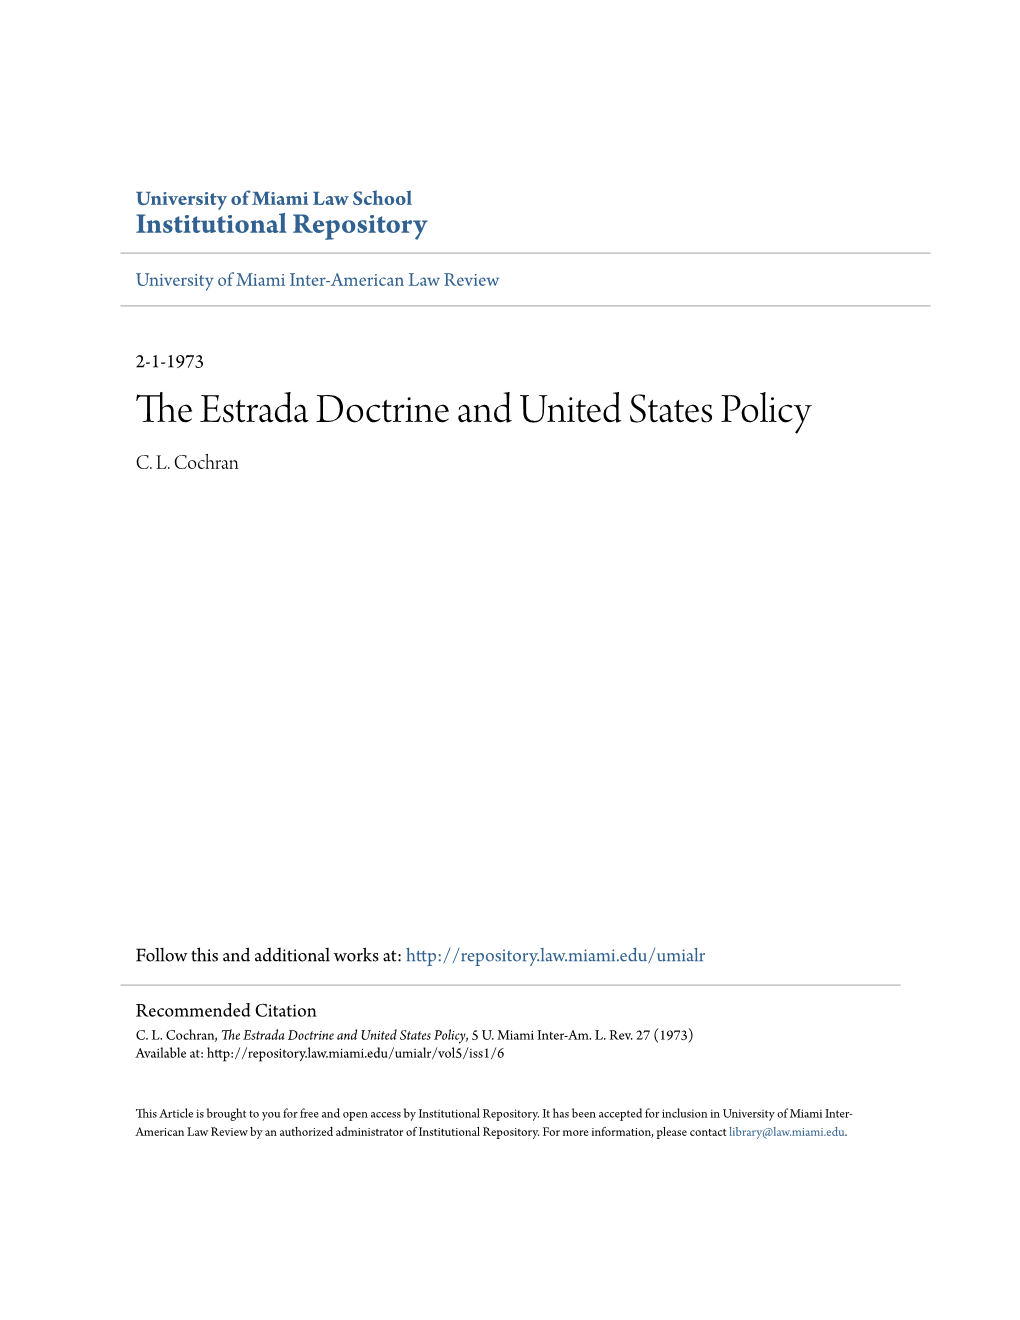 The Estrada Doctrine and United States Policy C